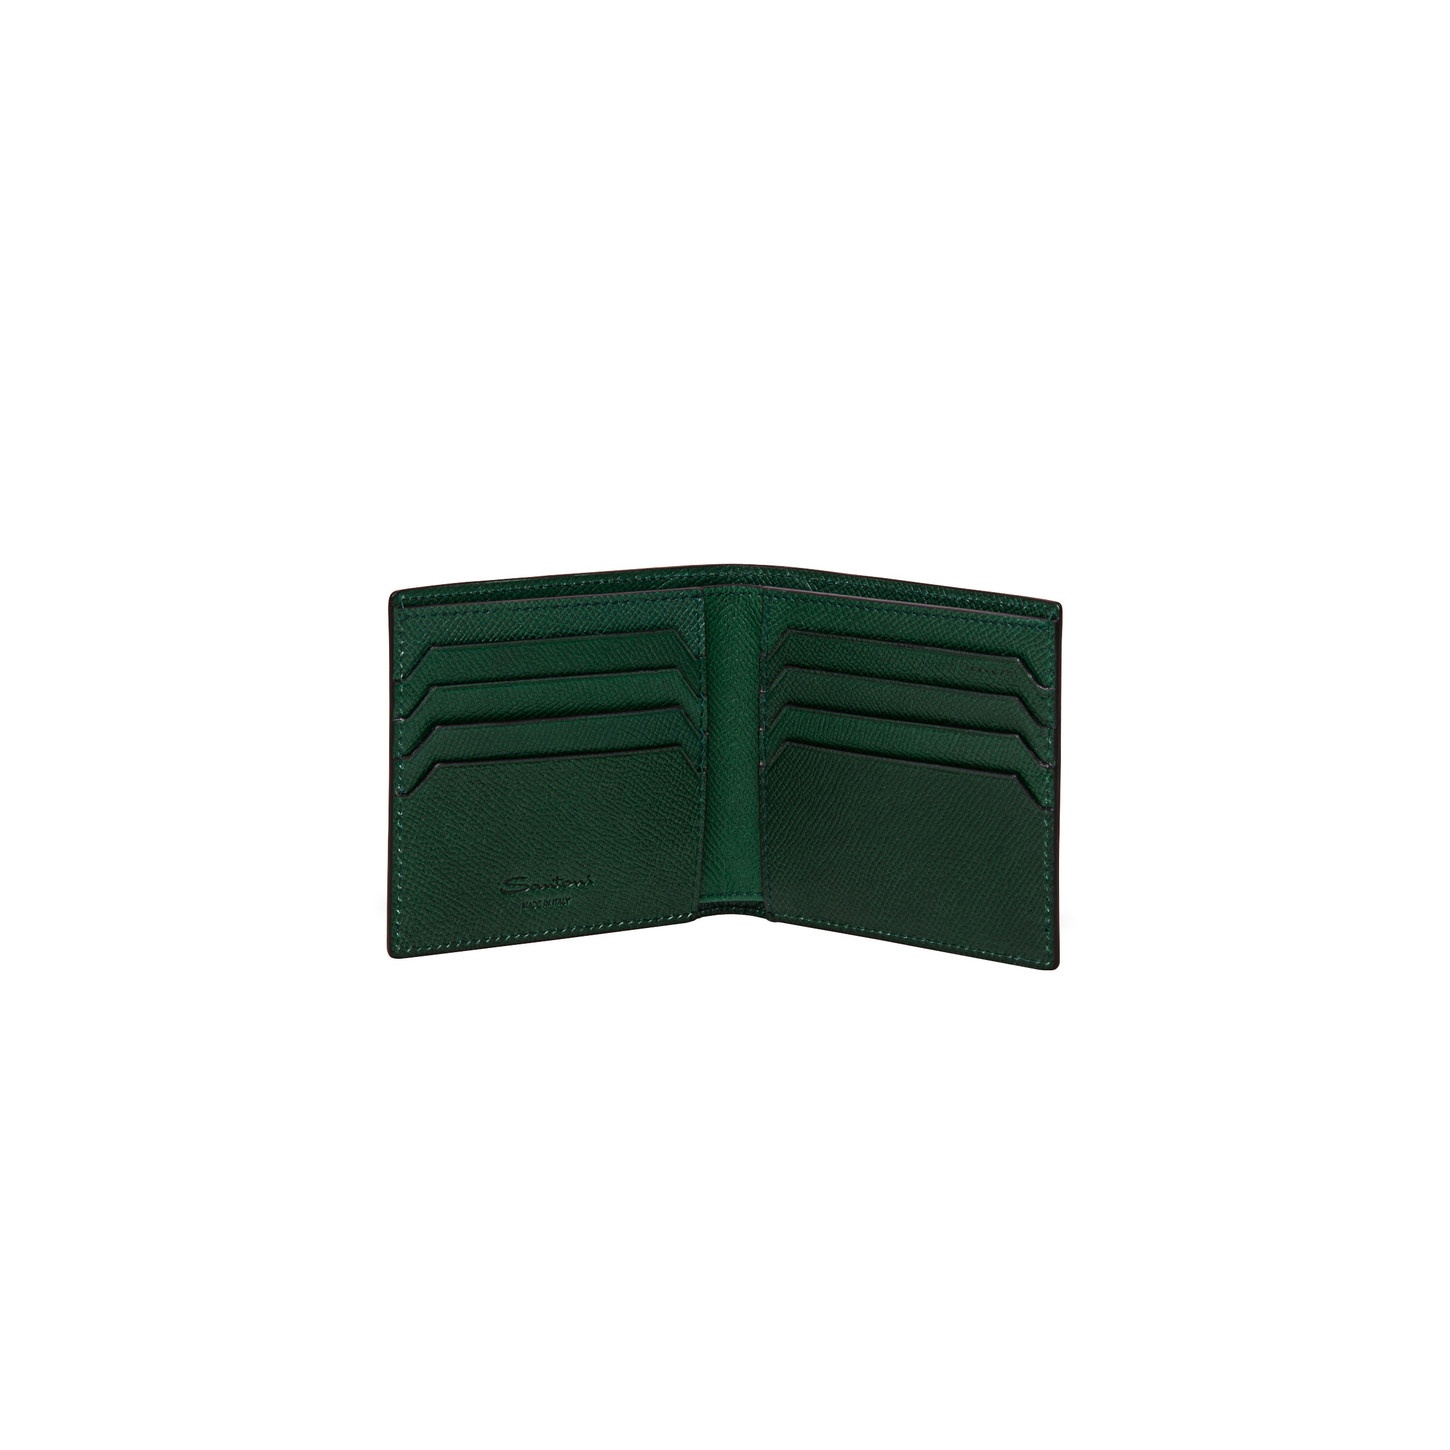 Green saffiano leather wallet - 3